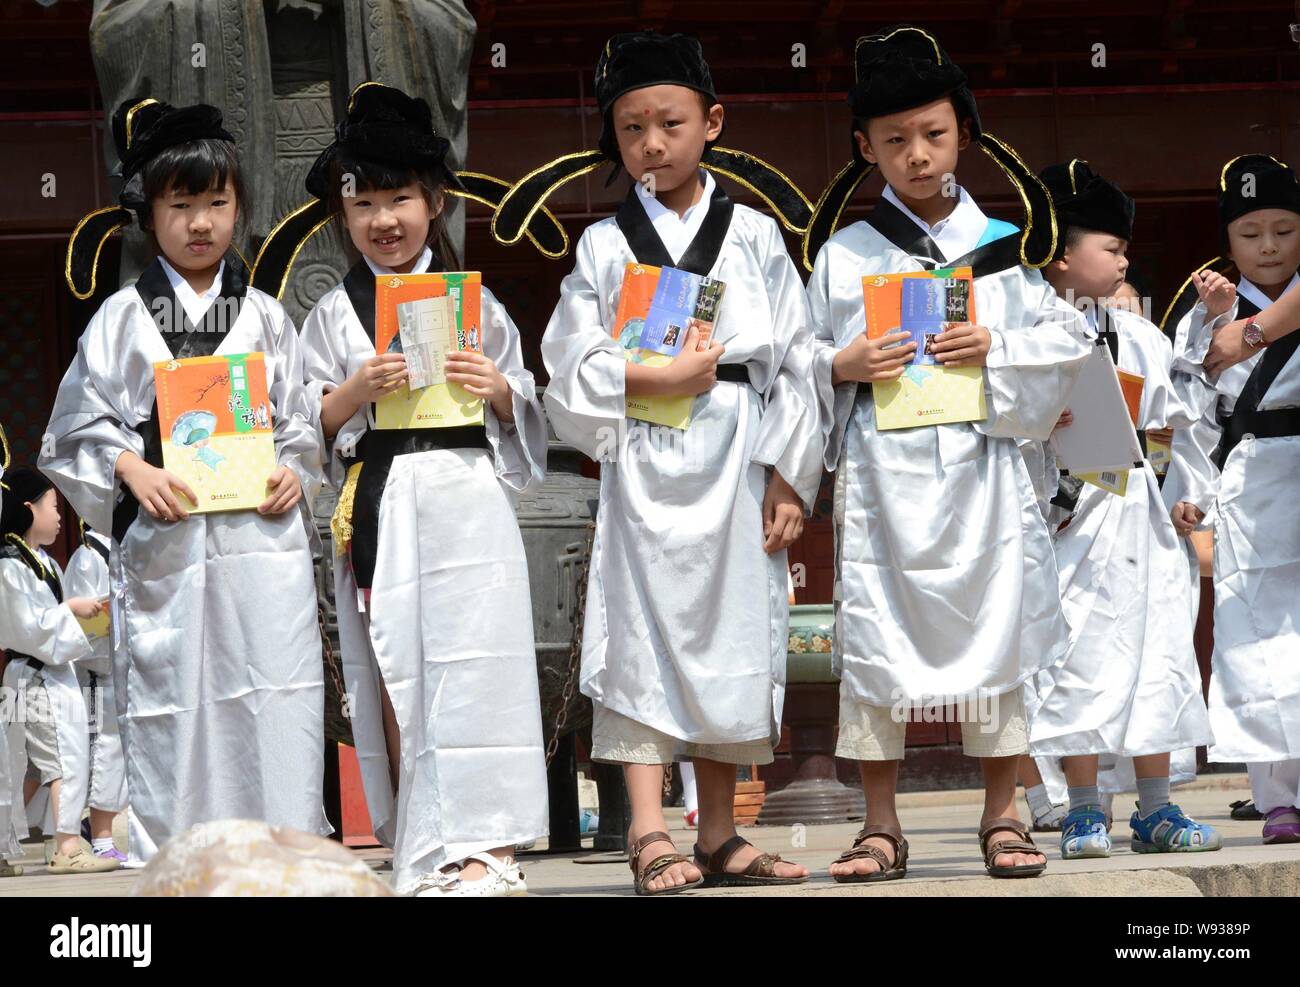 First-grade pupils wearing traditional Chinese uniforms pose with the Analects of Confucius during the first writing ceremony of a new semester at Fuz Stock Photo